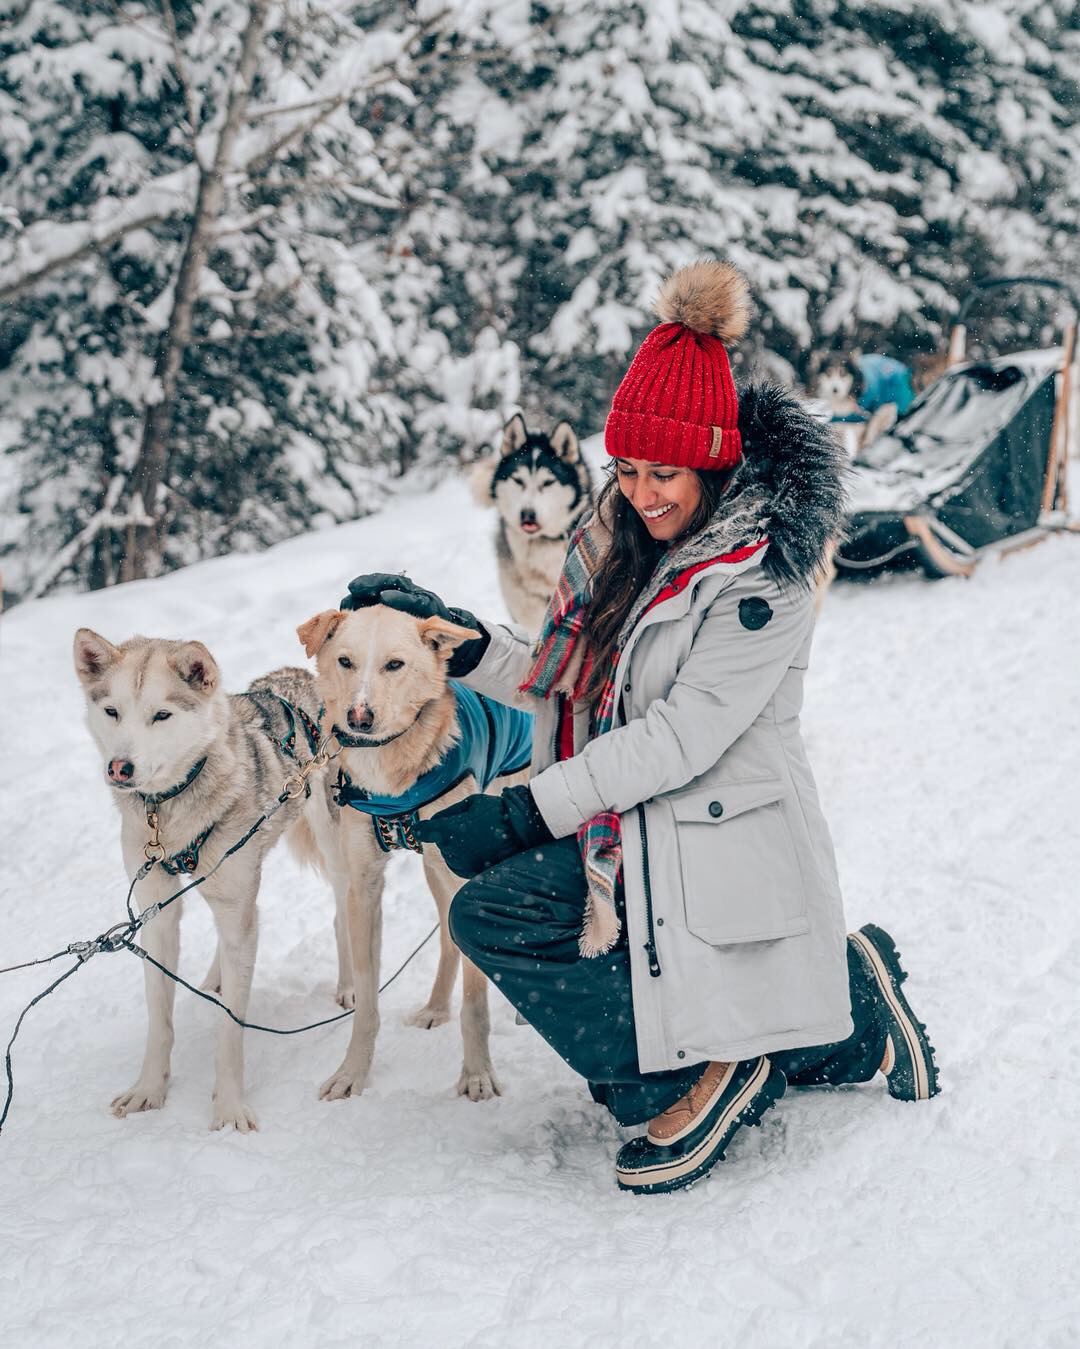 How To Book a Dog Sledding Tour in Banff, Alberta, Canada